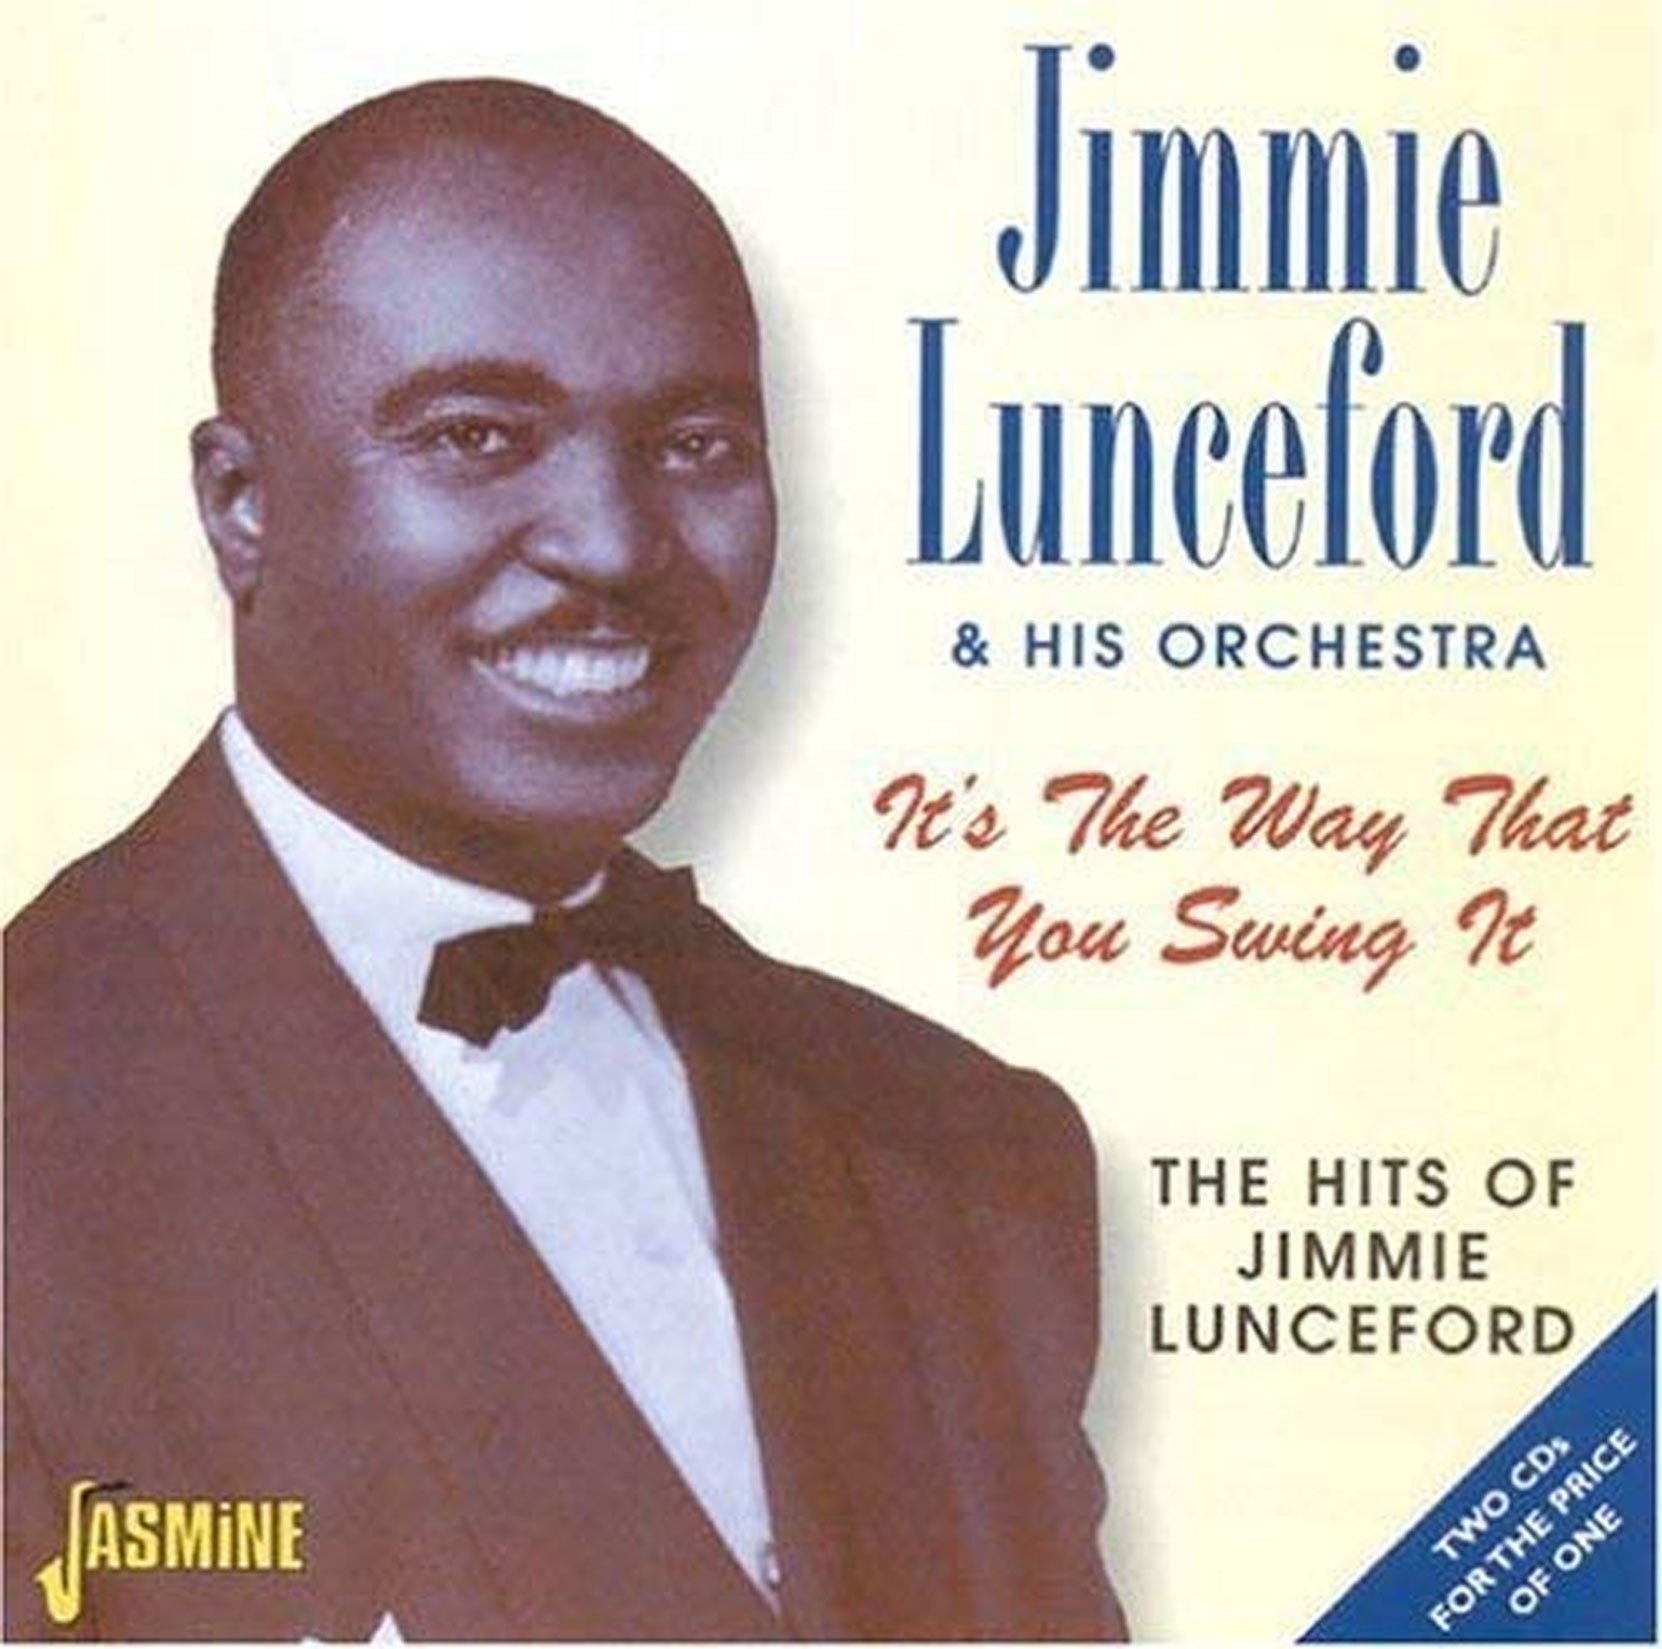 CD cover, Jimmie Lunceford and his Orchestra, It's The Way That You Swing It, a 2 CD set released on Jasmine Records